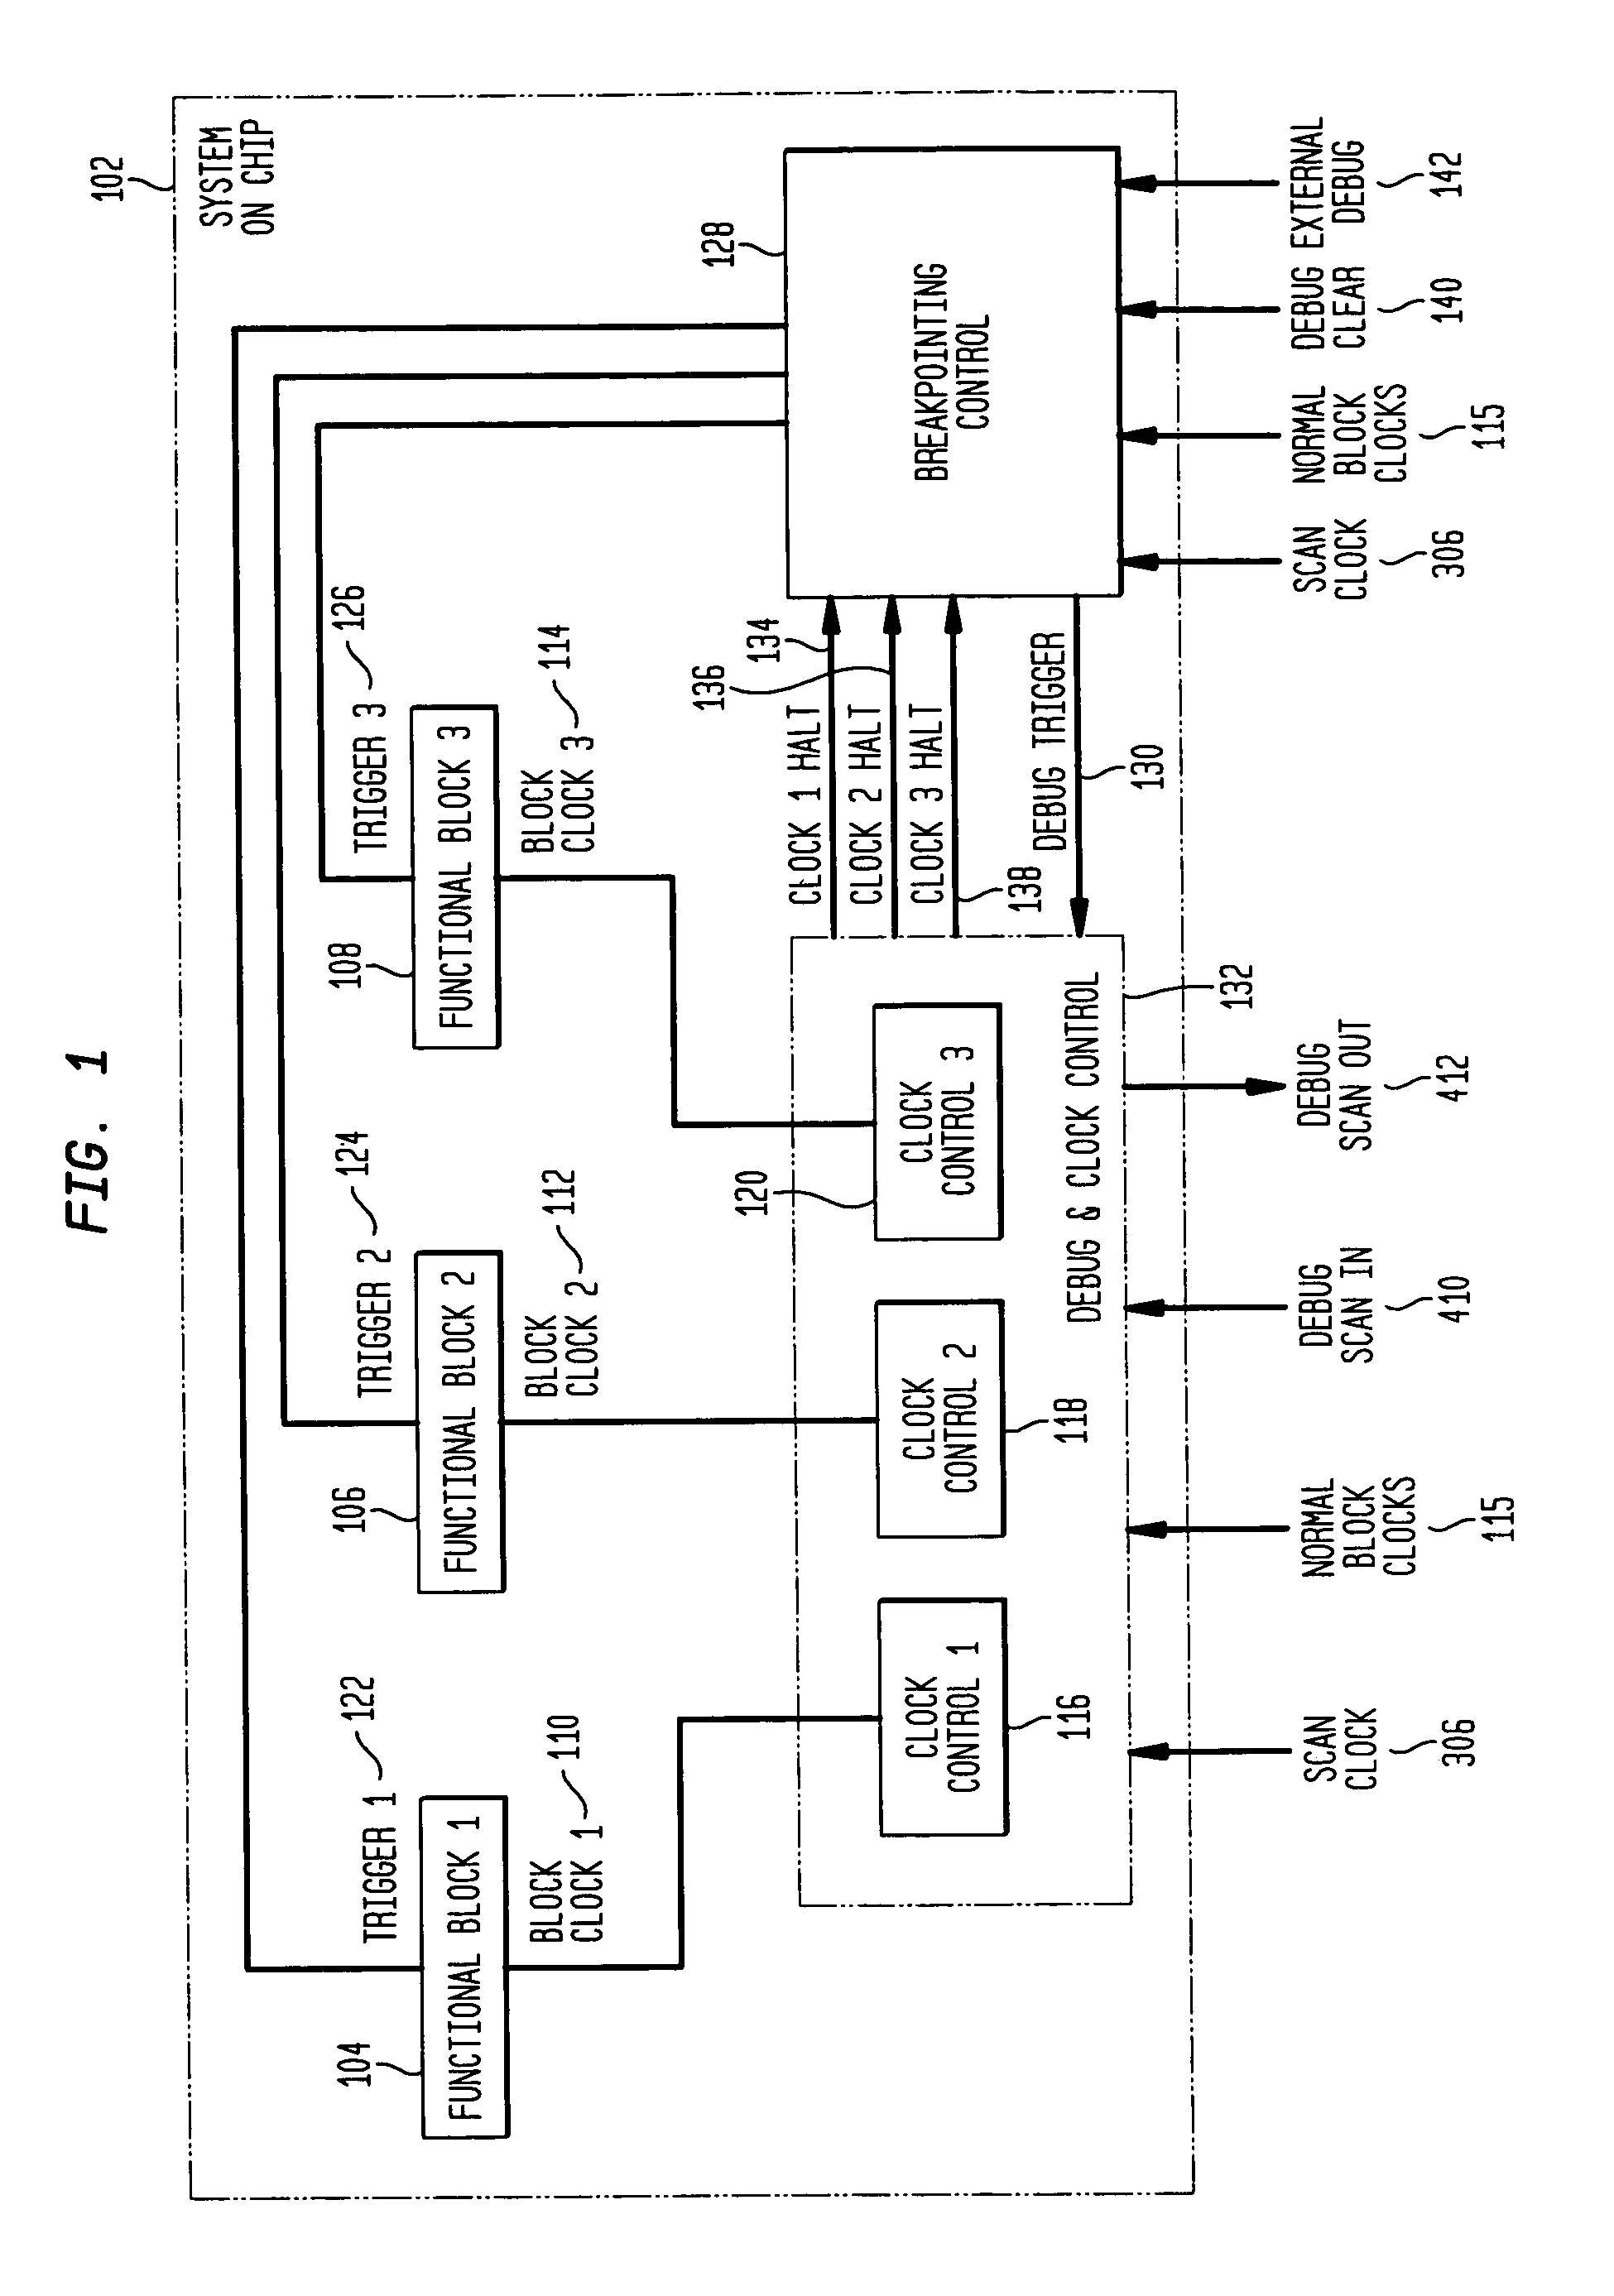 System and method for debugging system-on-chips using single or n-cycle stepping